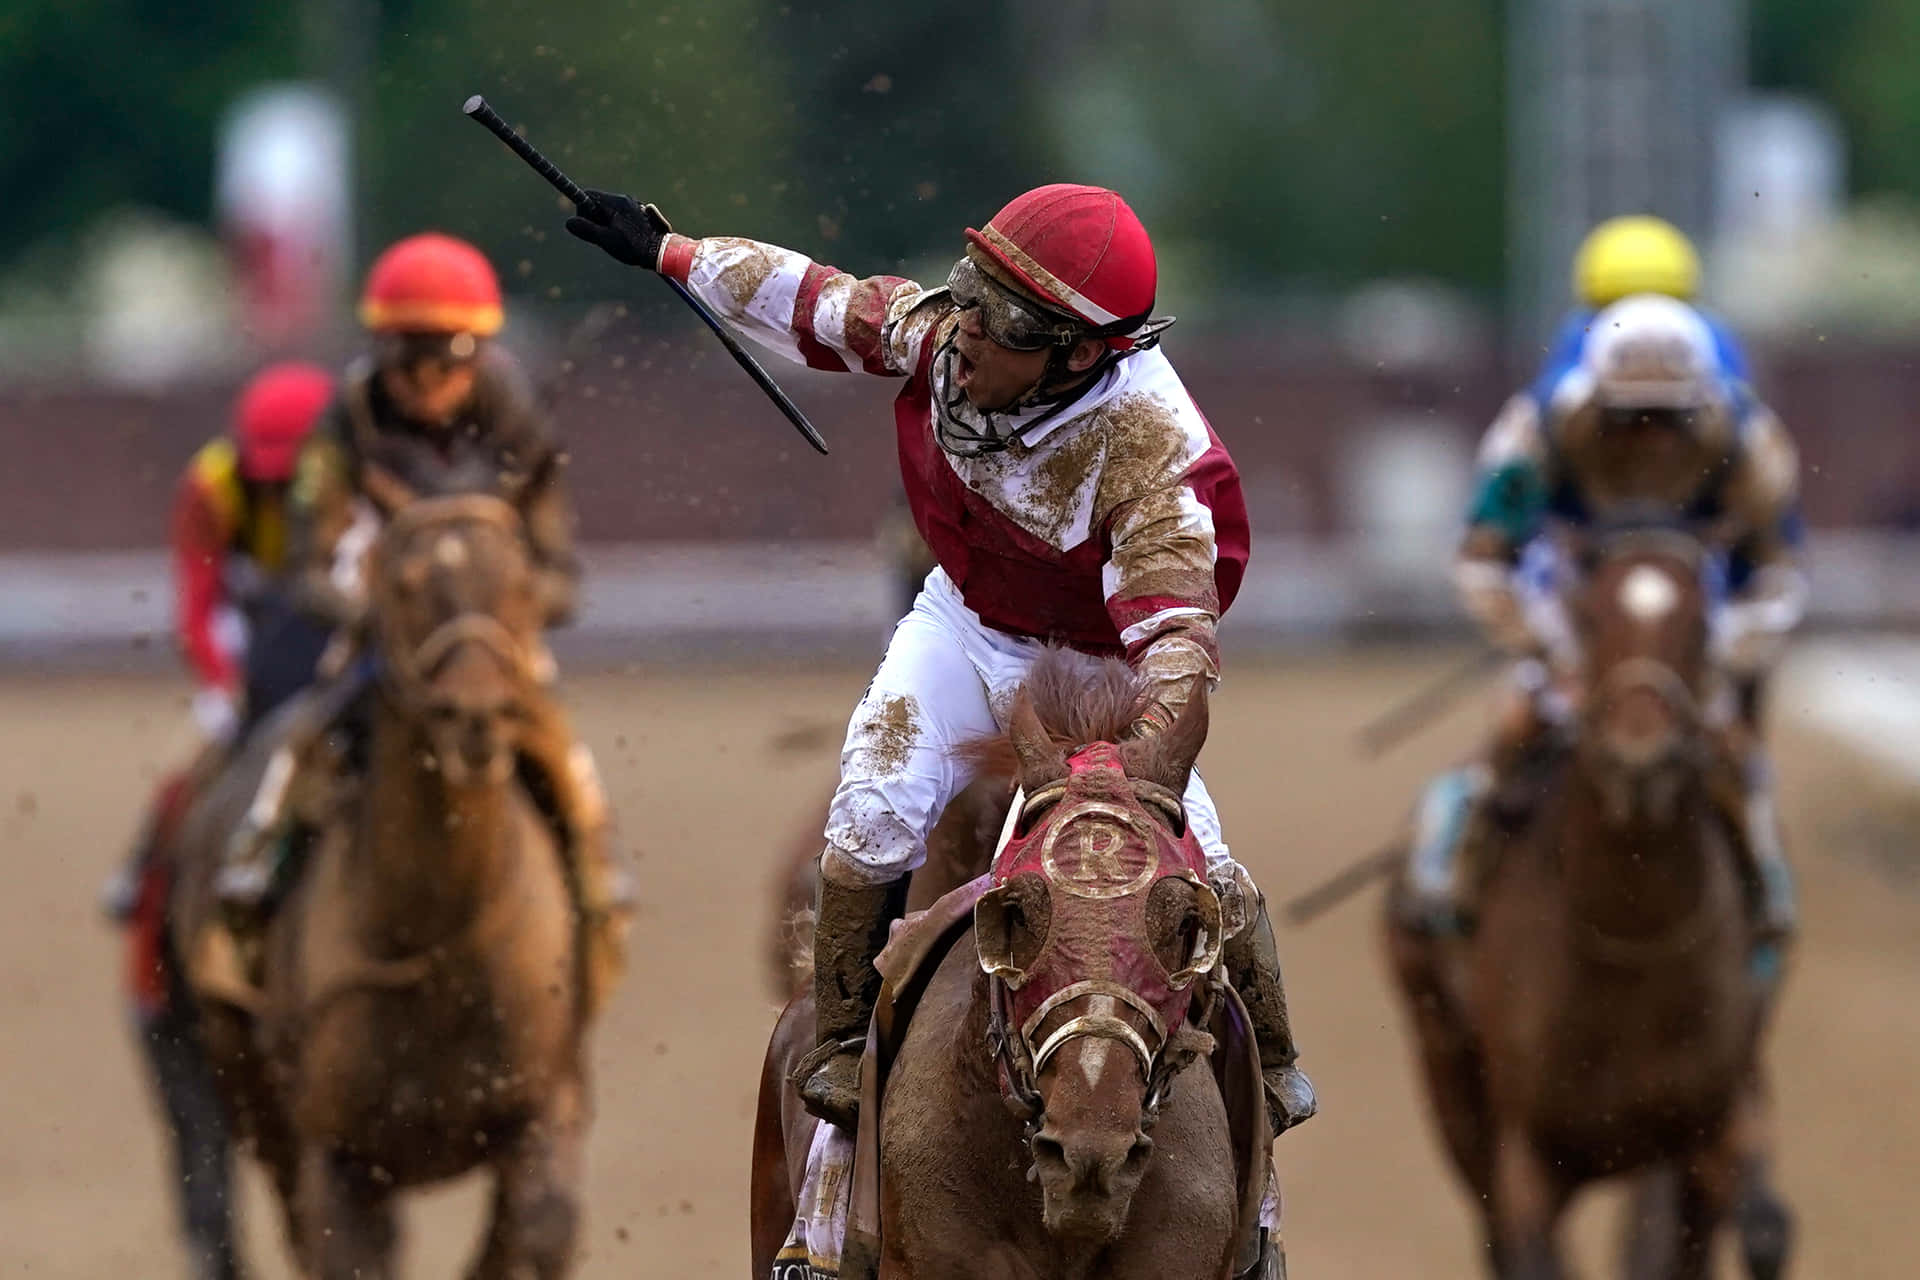 A Jockey Is Riding A Horse In A Race